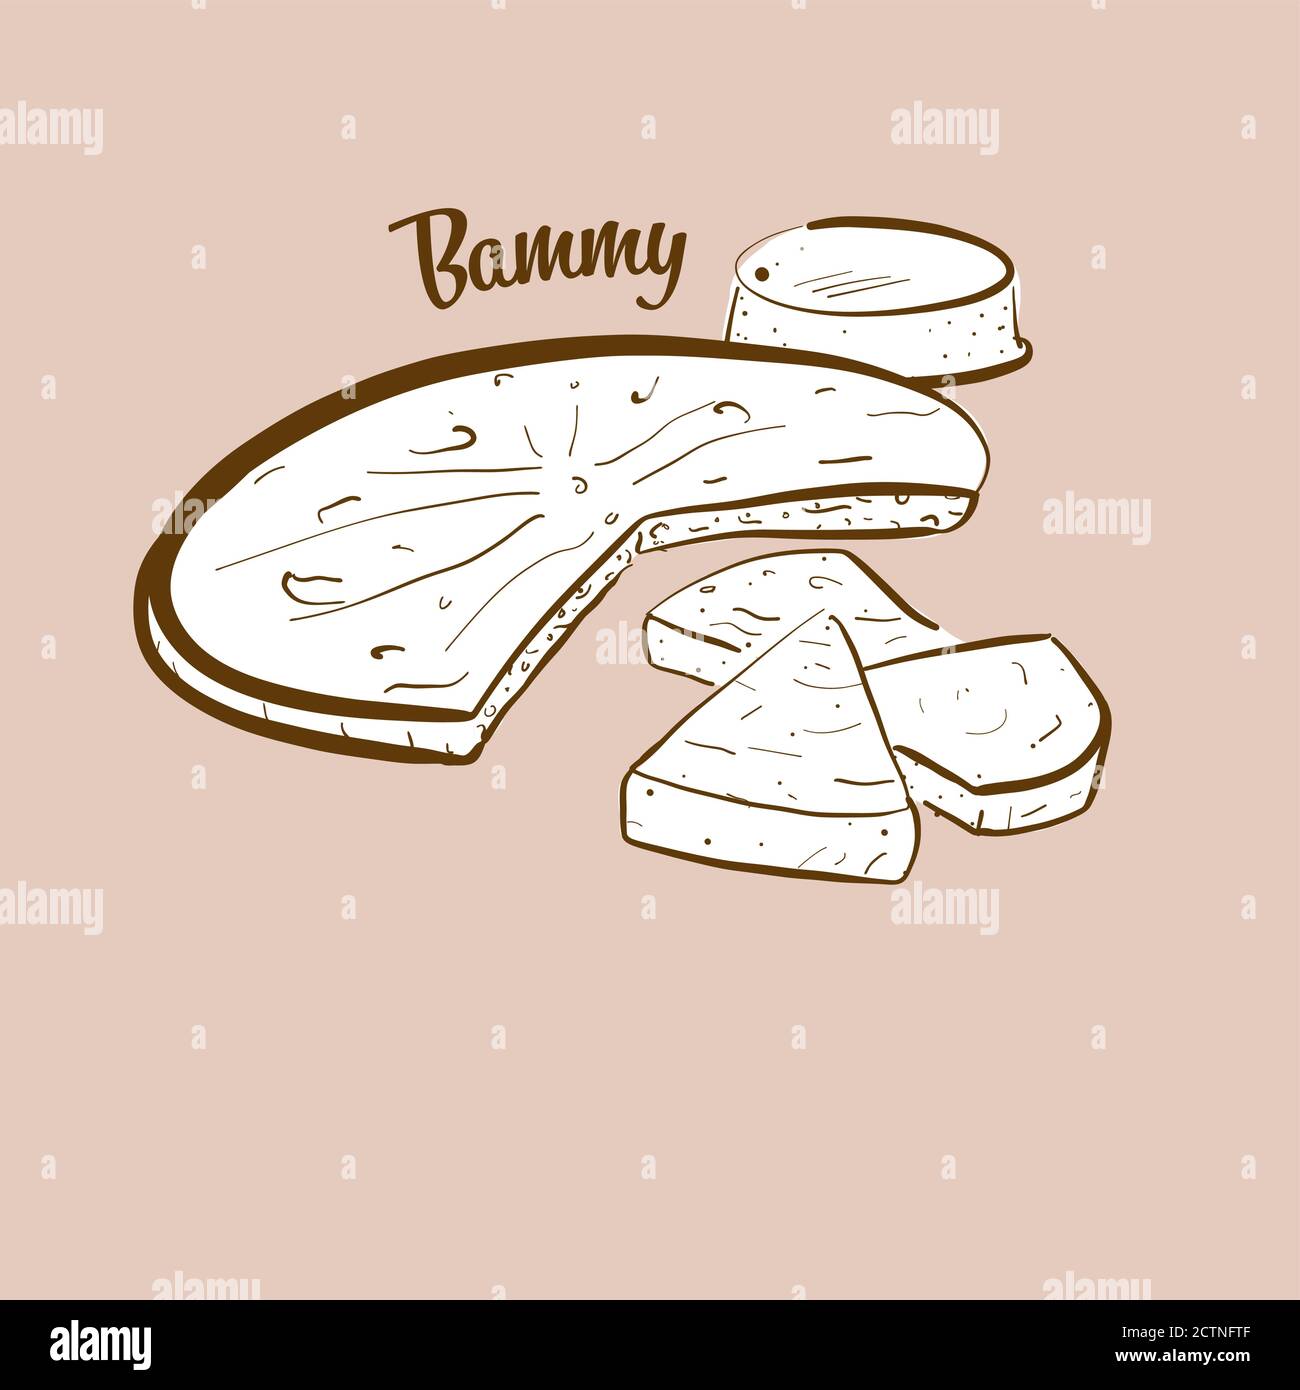 Hand-drawn Bammy bread illustration. Flatbread, usually known in Jamaica. Vector drawing series. Stock Vector